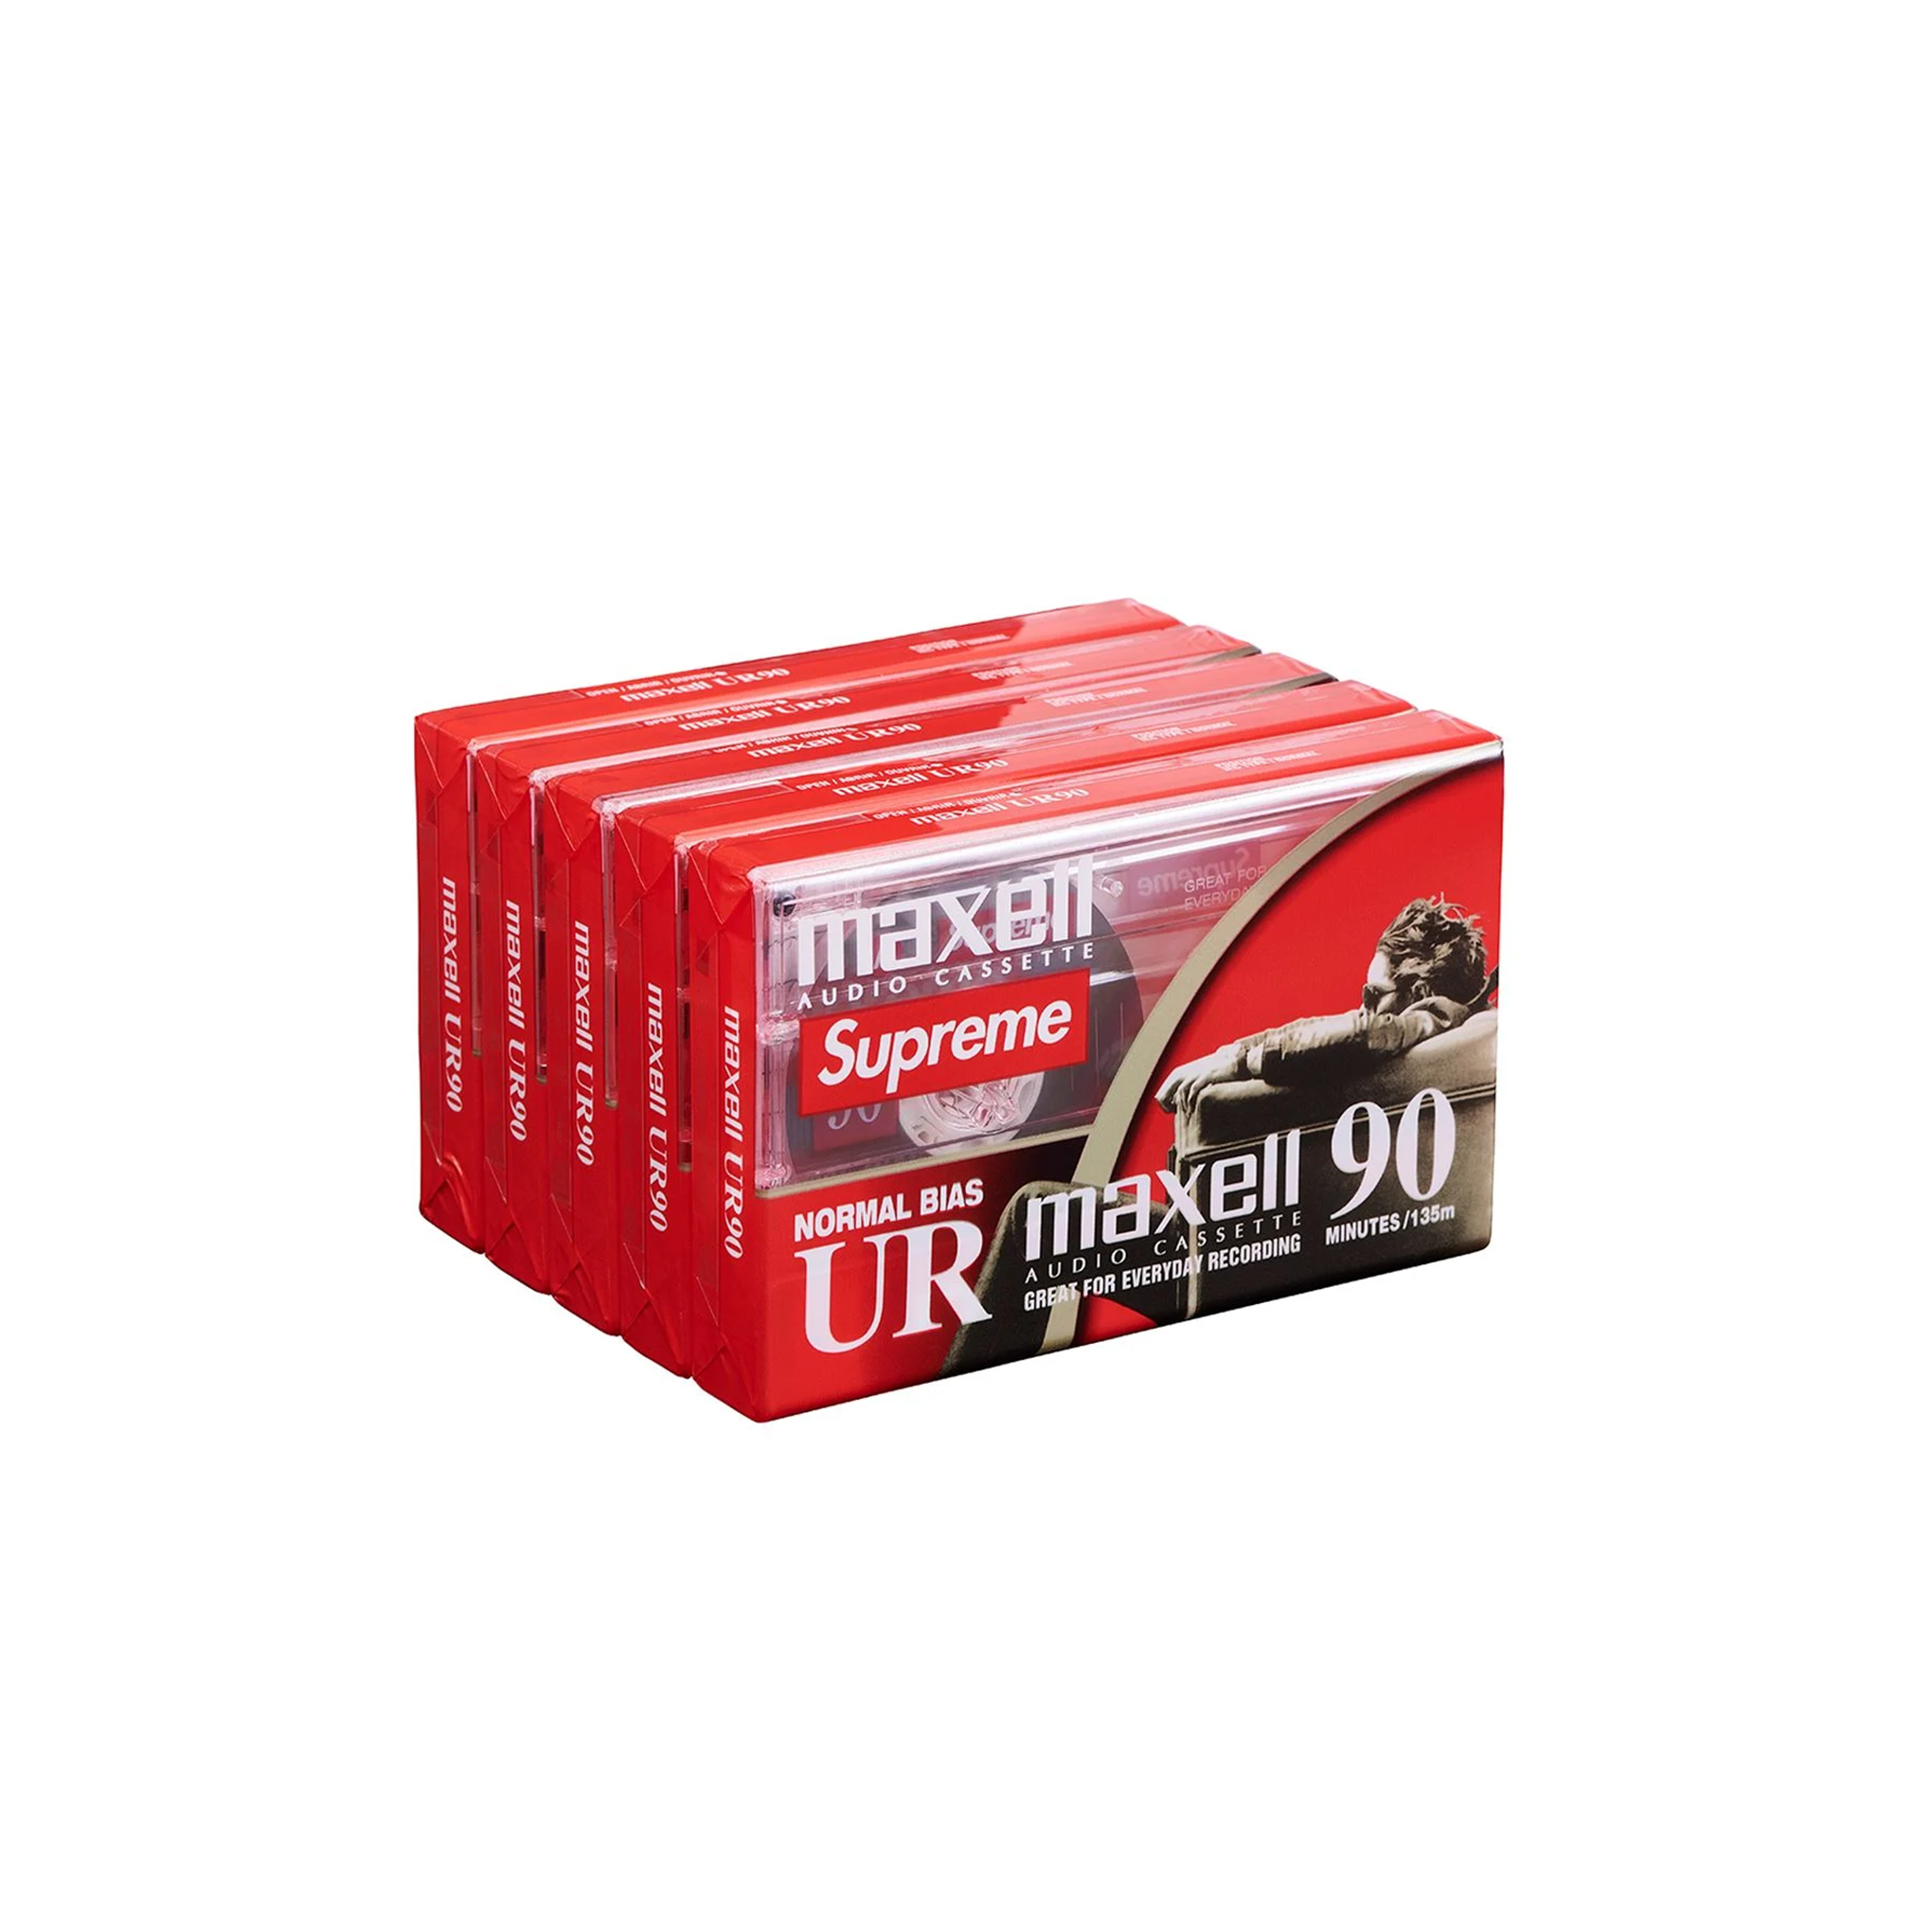 SUPREME MAXELL CASSETTE TAPES (5 PACK)